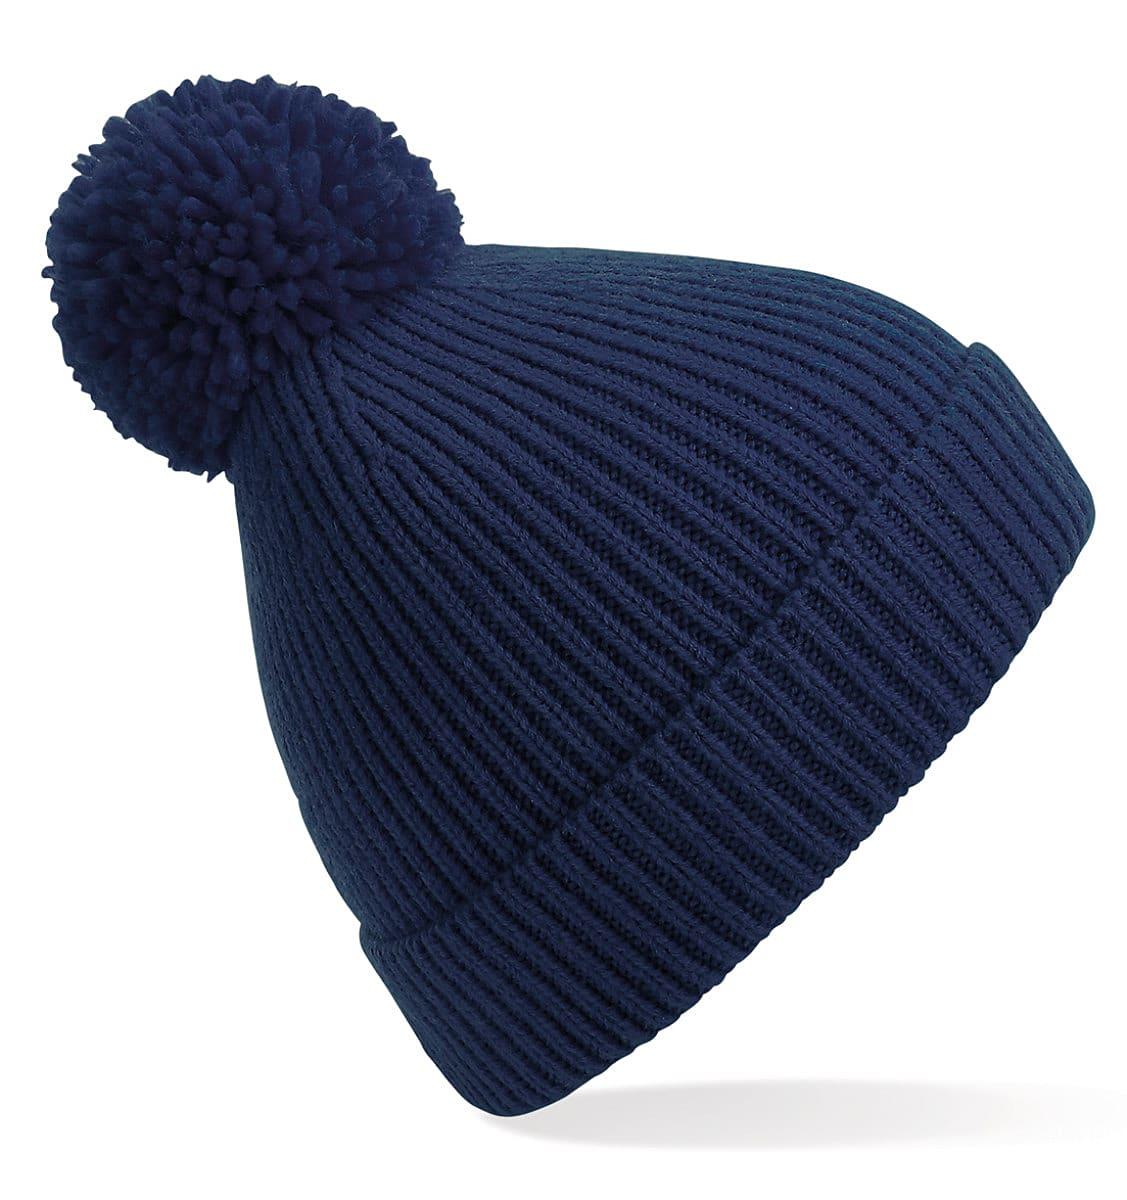 Beechfield Knit Ribbed Pom Pom Beanie Hat in Oxford Navy (Product Code: B382)